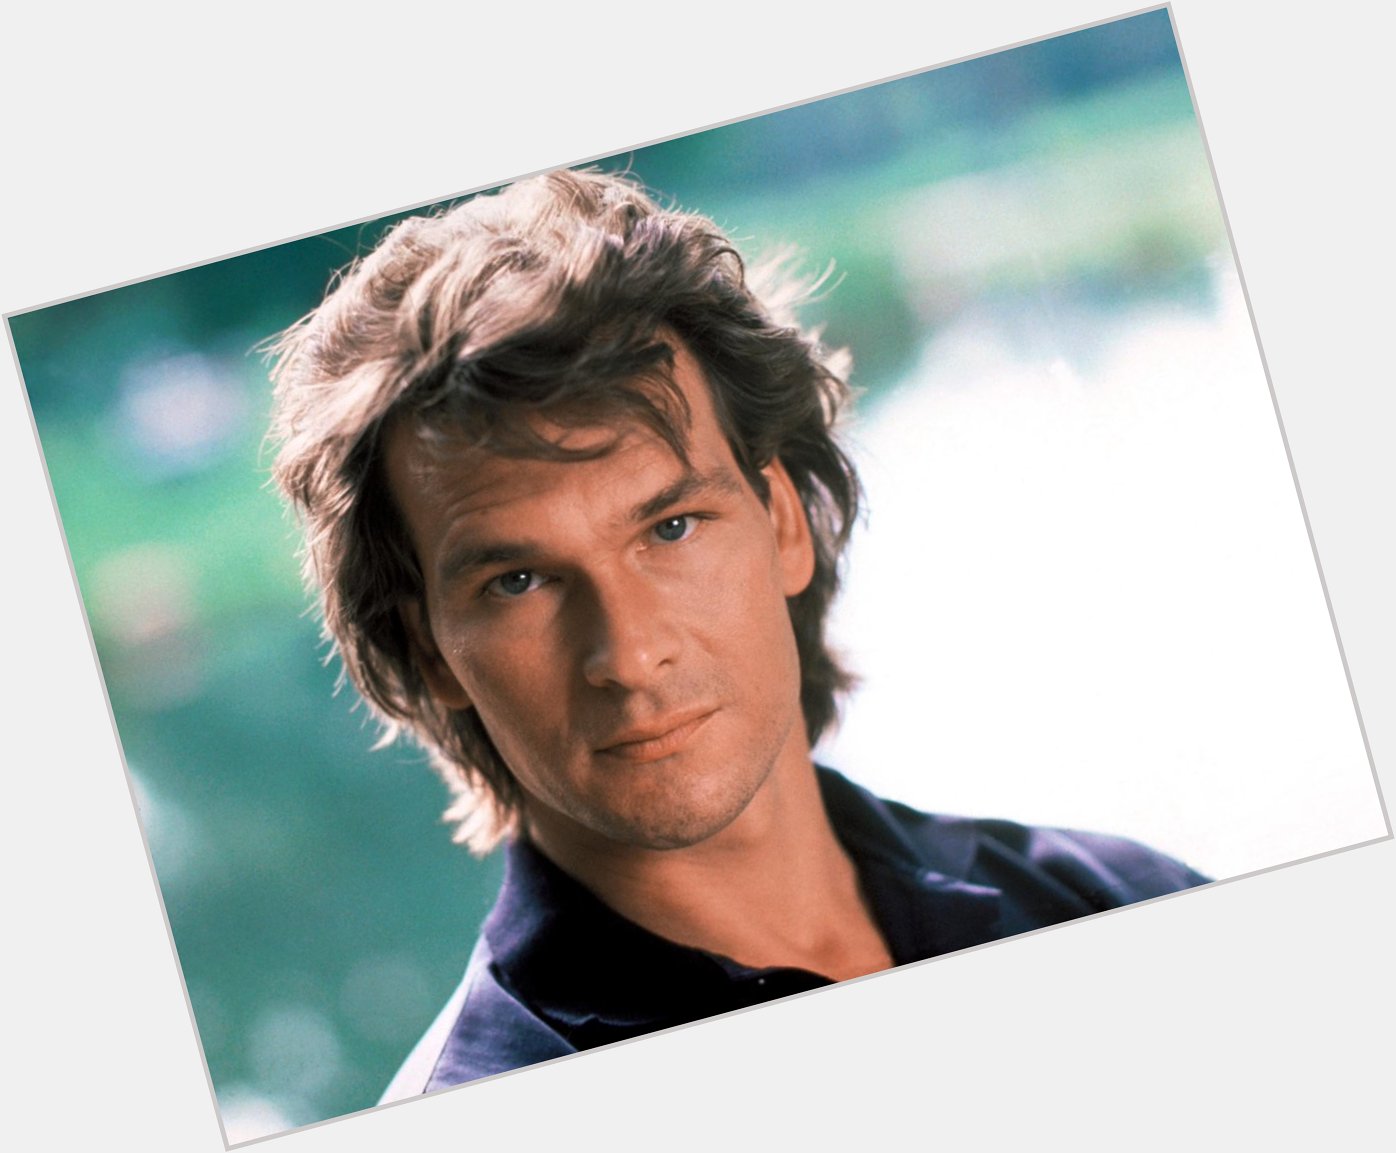 HAPPY BDAY AND RIP PATRICK SWAYZE. HE WAS REALLY GOOD AT MAKING PIE. GONE 2 SOON. 